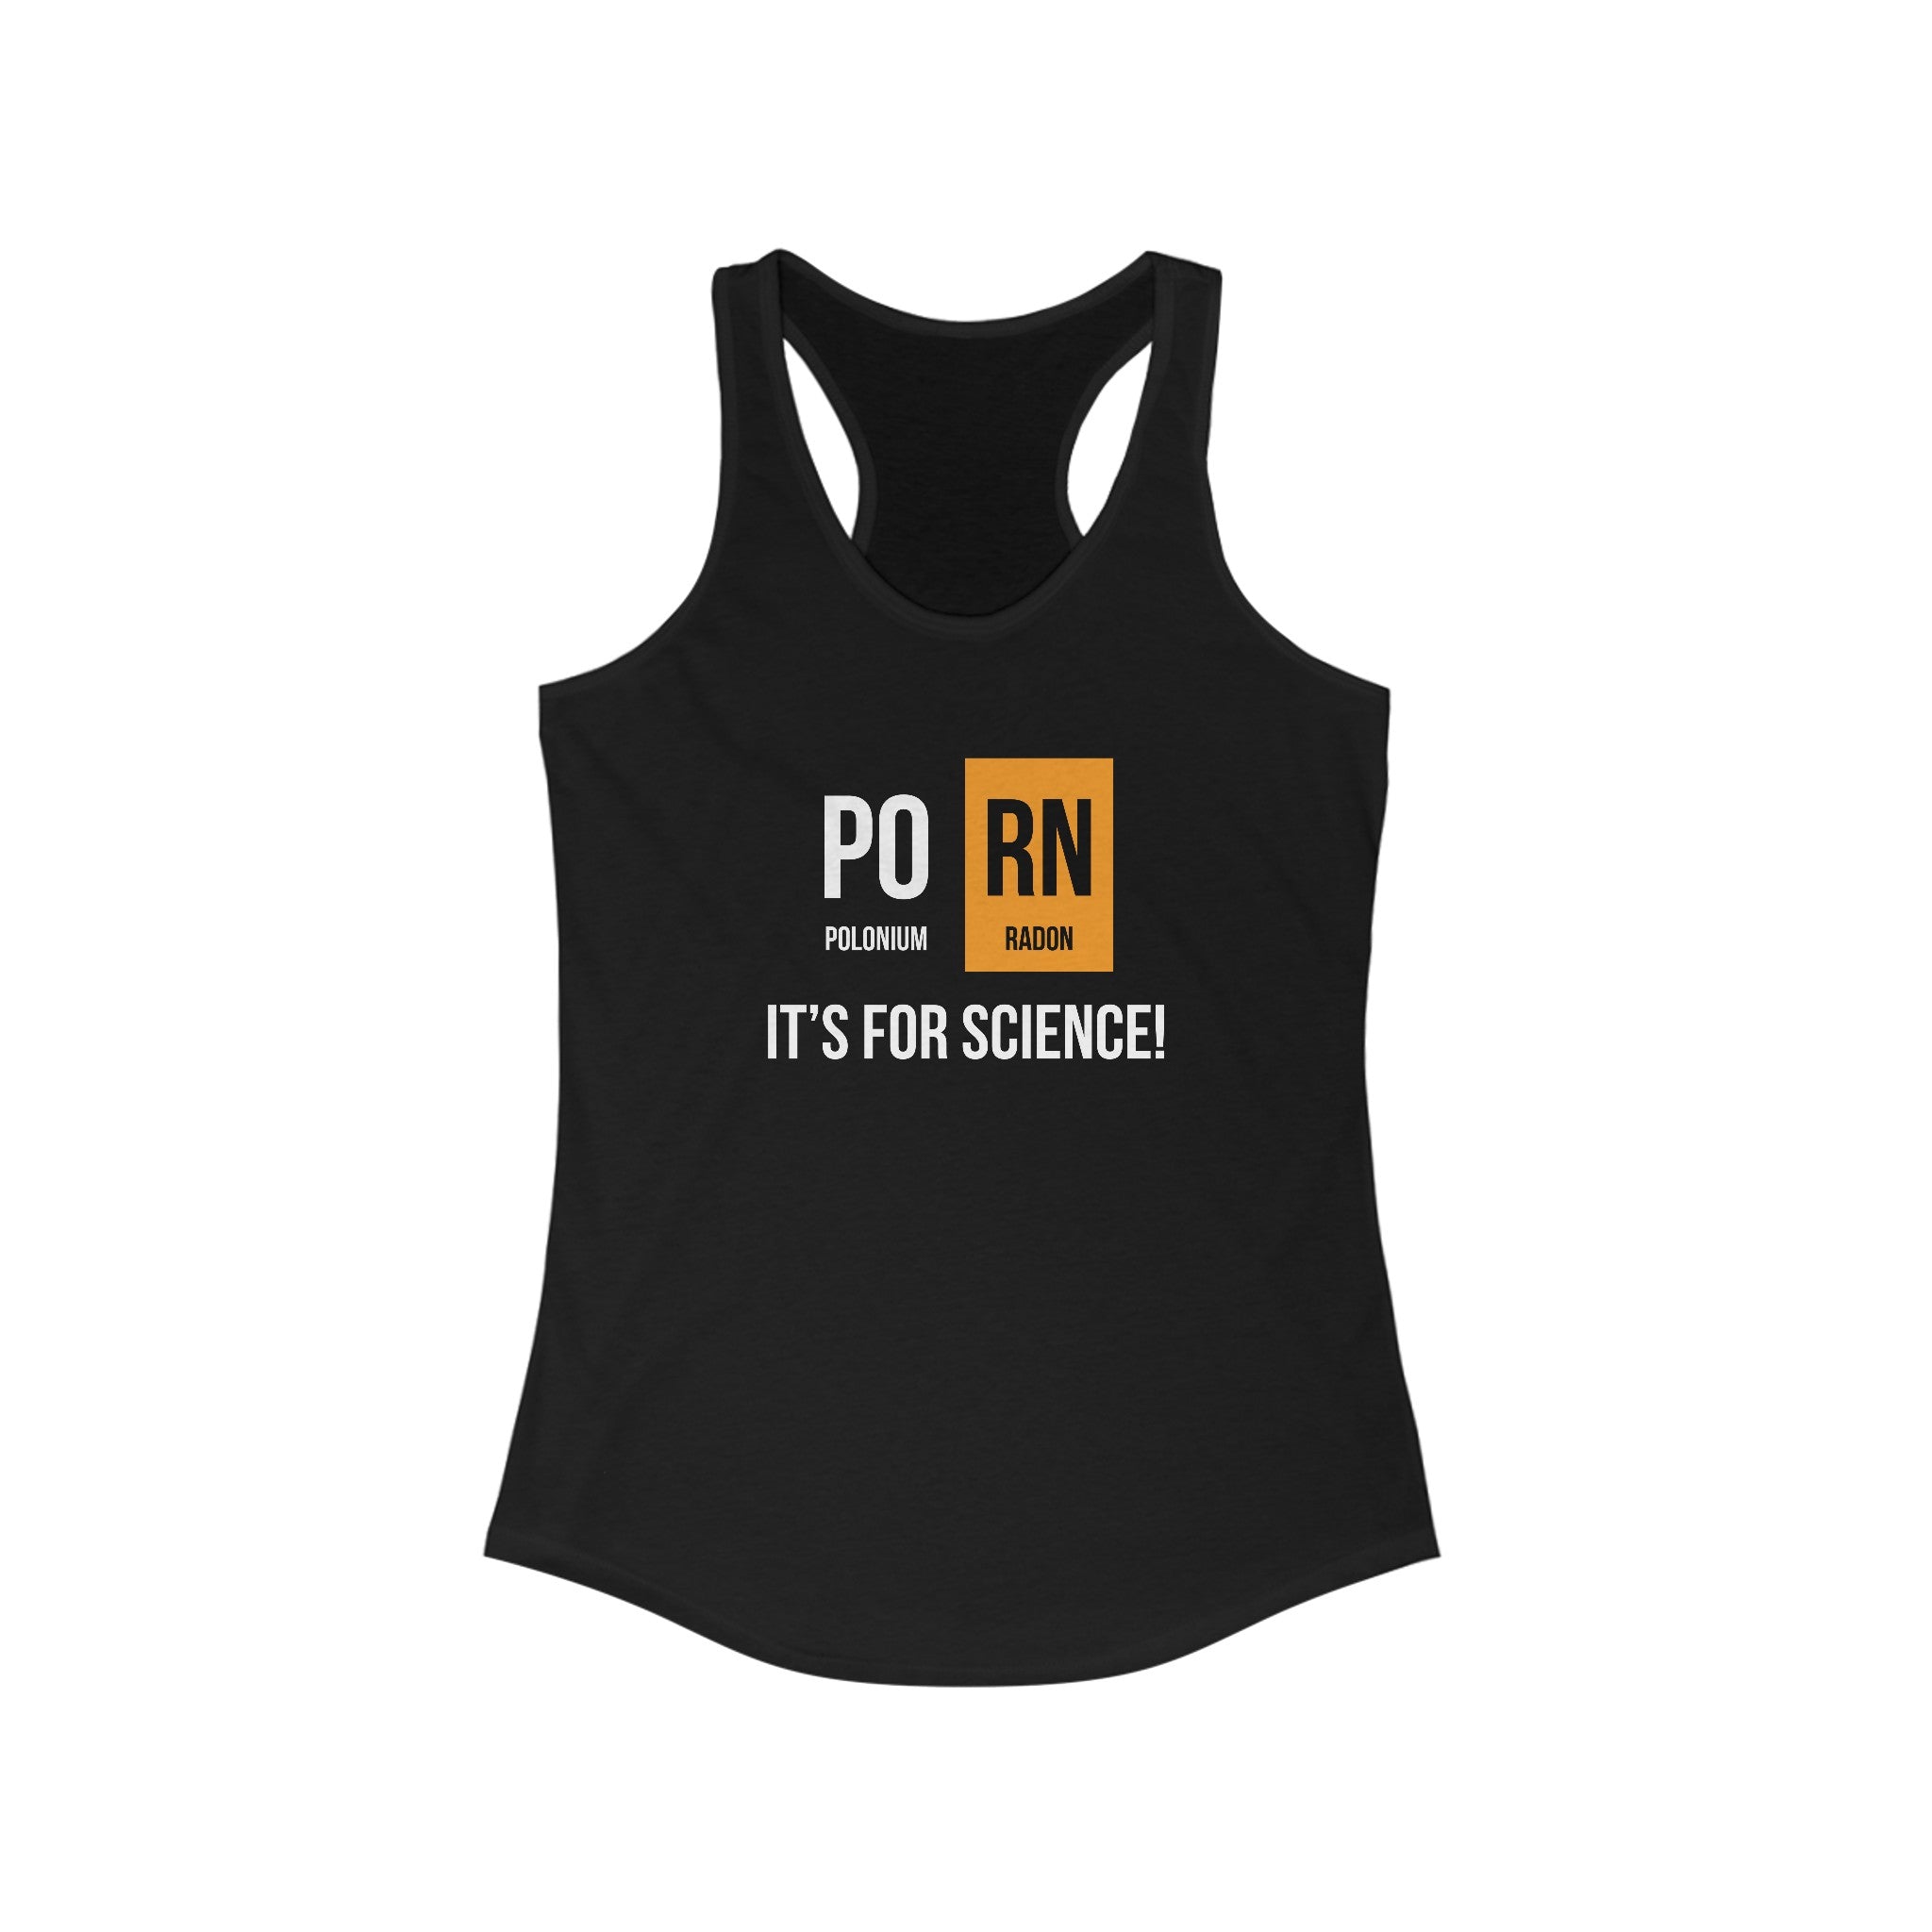 PO-RN - Women's Racerback Tank featuring a design that reads "PO RN" with "Polonium" and "Radon" below in periodic table style squares, and the caption "IT'S FOR SCIENCE!" underneath. Perfect for an active living or dynamic lifestyle.